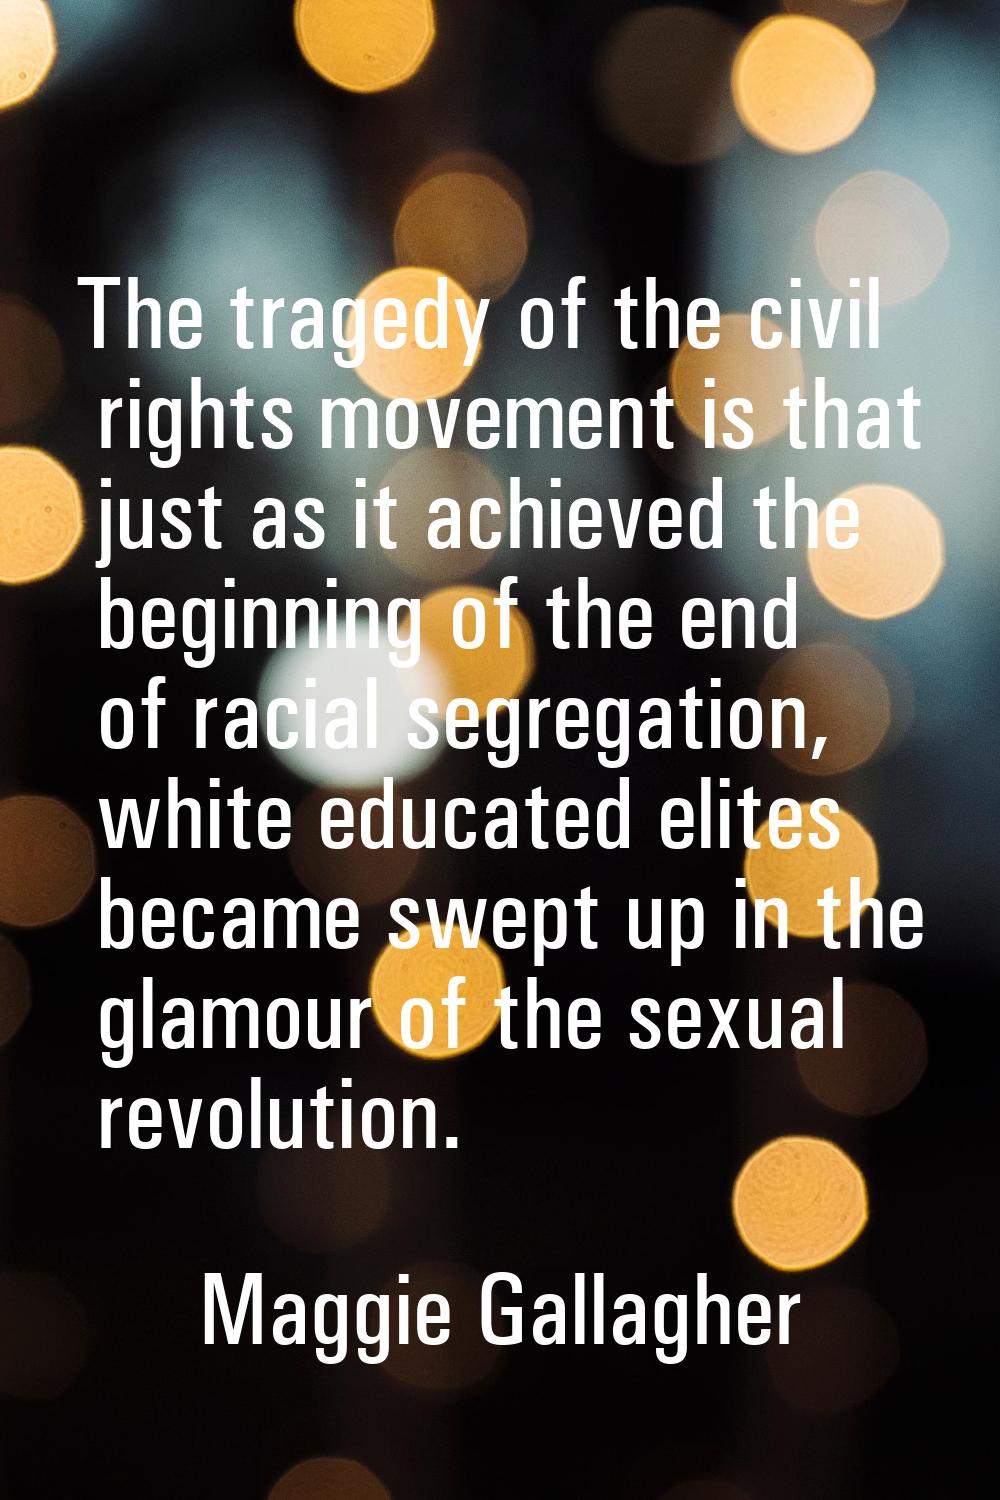 The tragedy of the civil rights movement is that just as it achieved the beginning of the end of ra